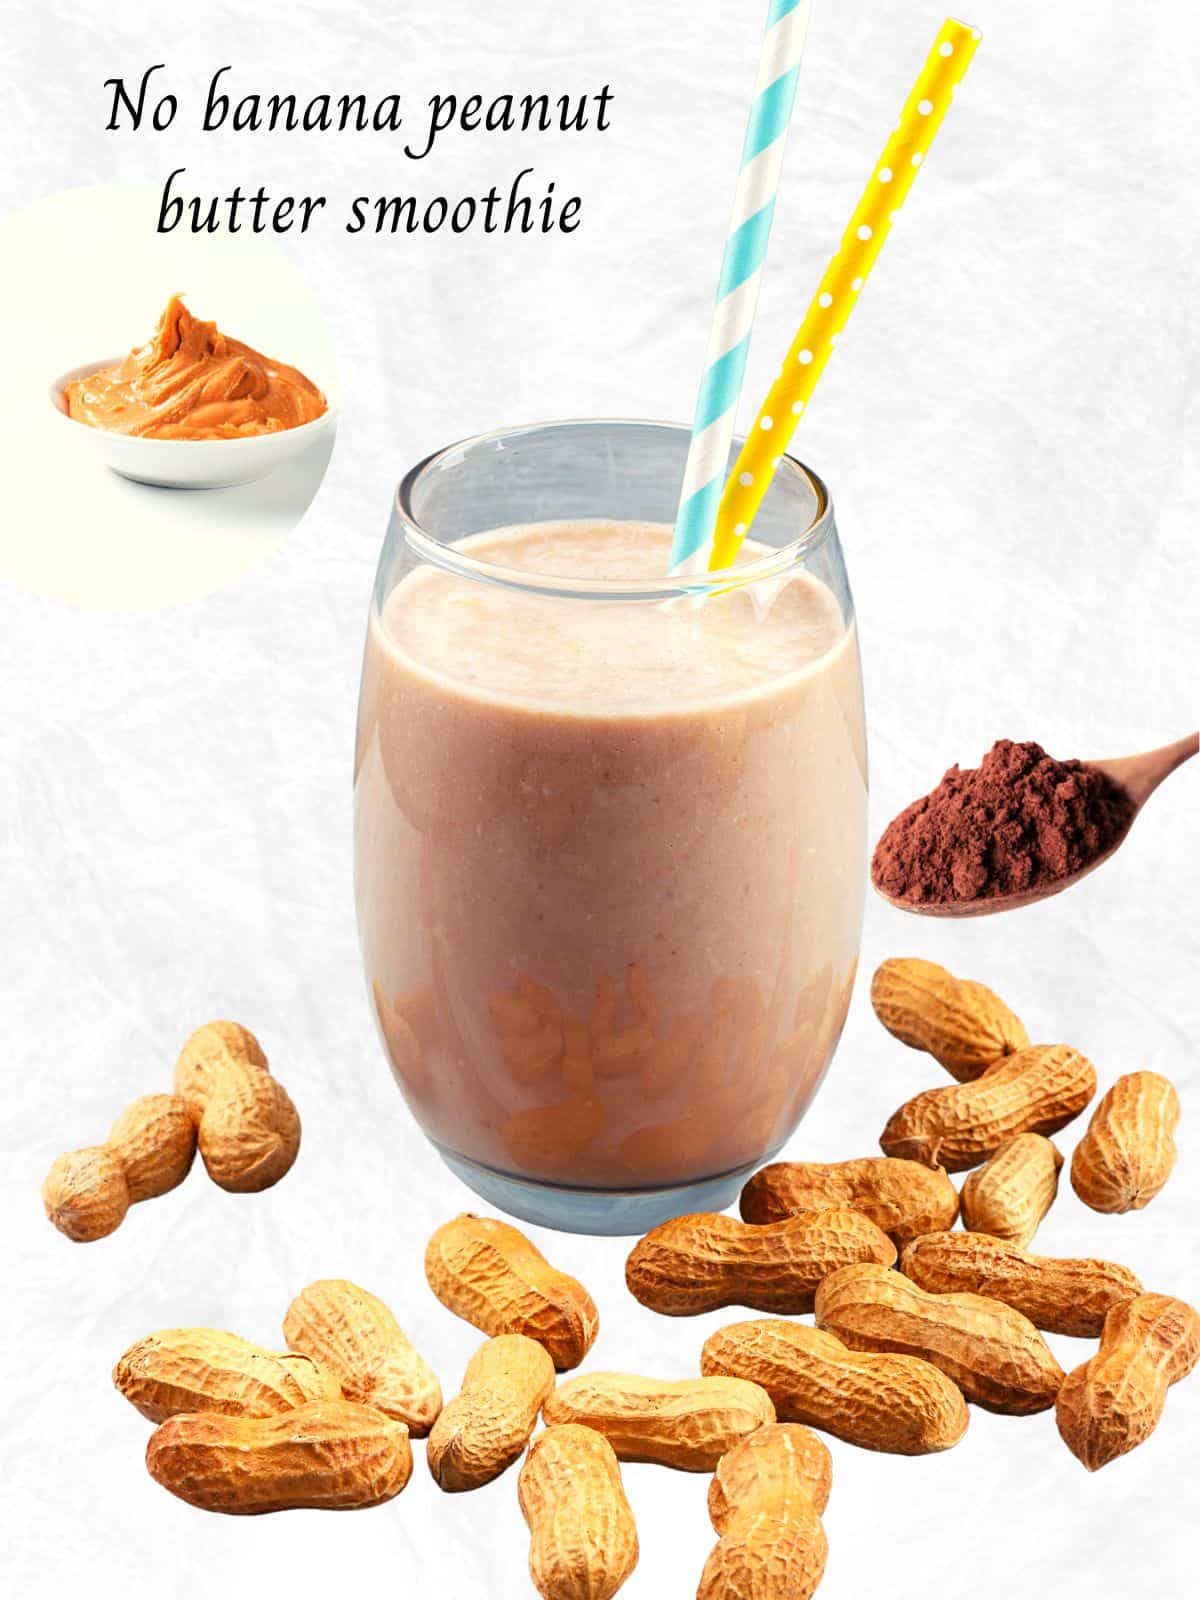 Peanut butter smoothie without banana in a glass with peanuts and cocoa powder and nut butter around the glass 